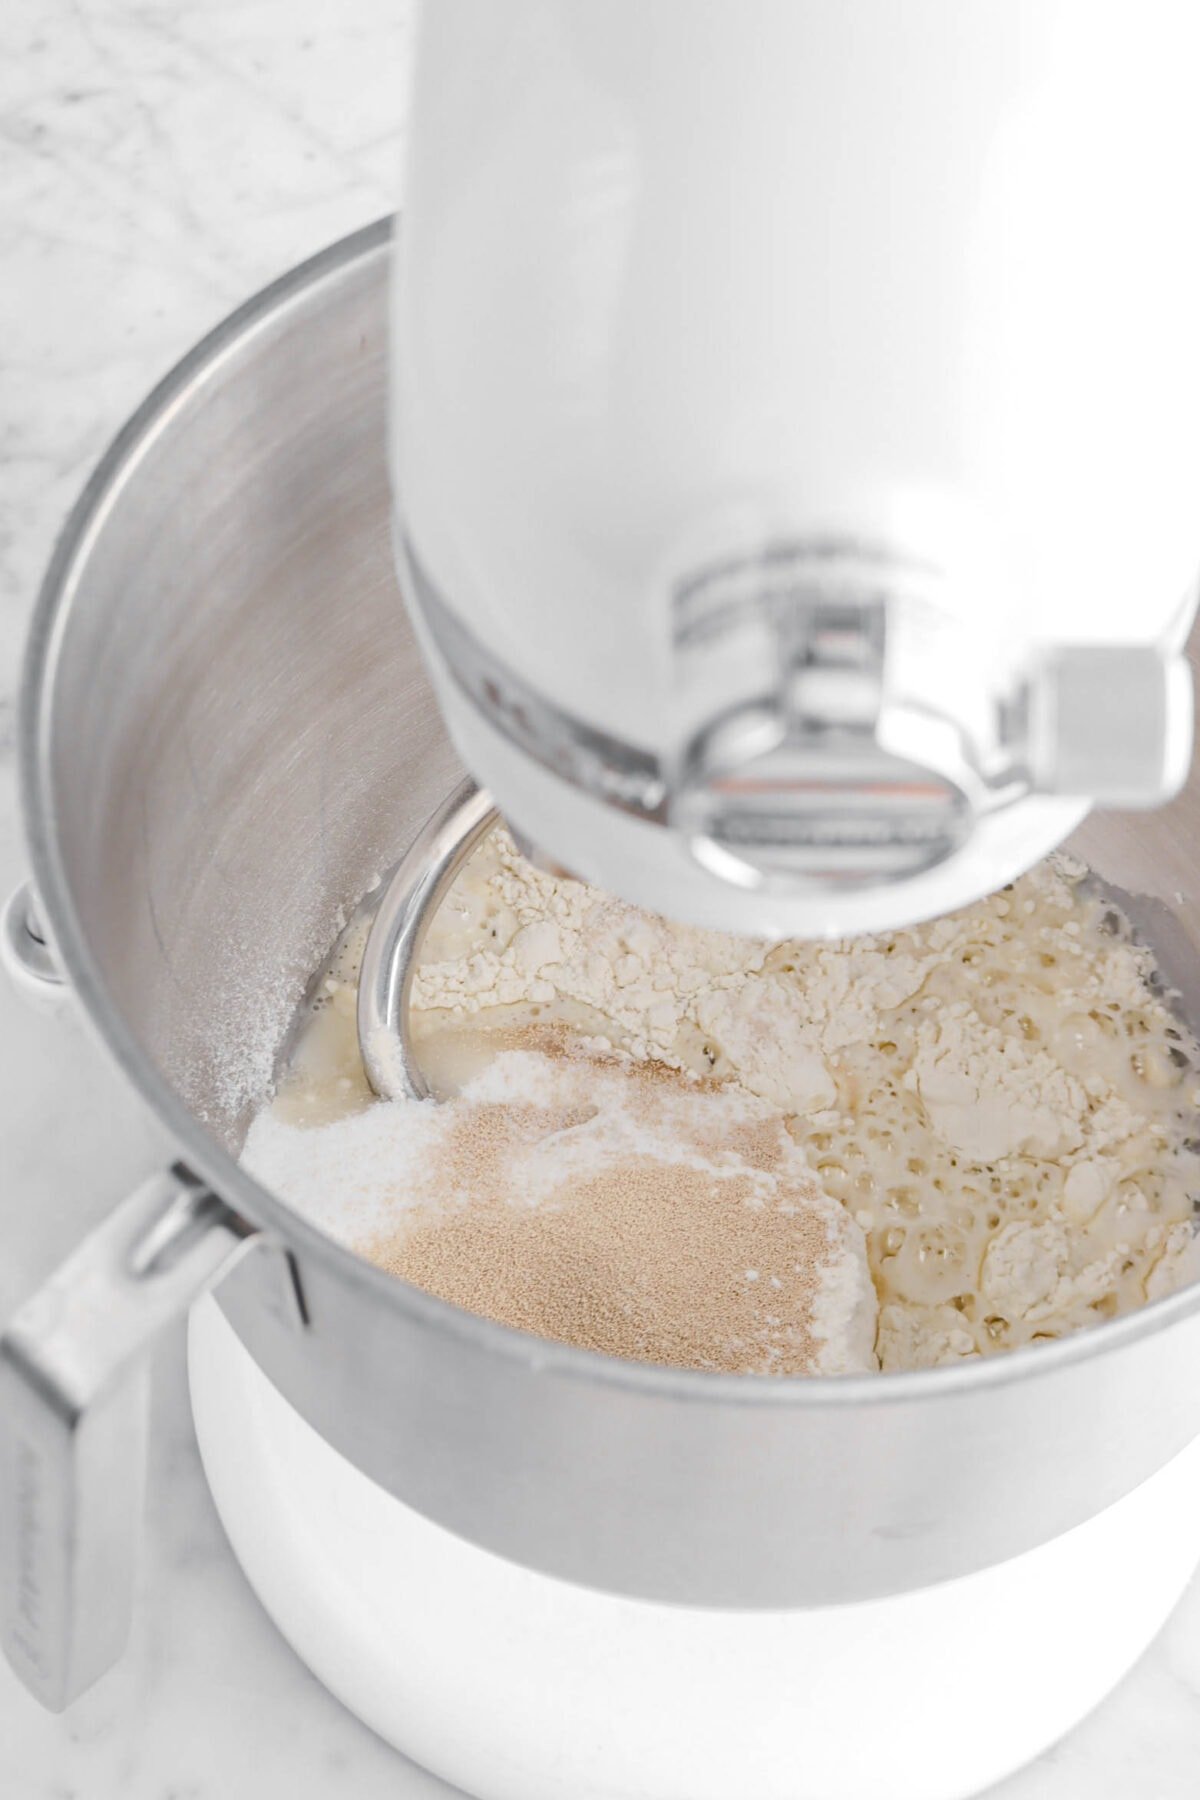 flour, sugar, yeast, and water in stand mixer.